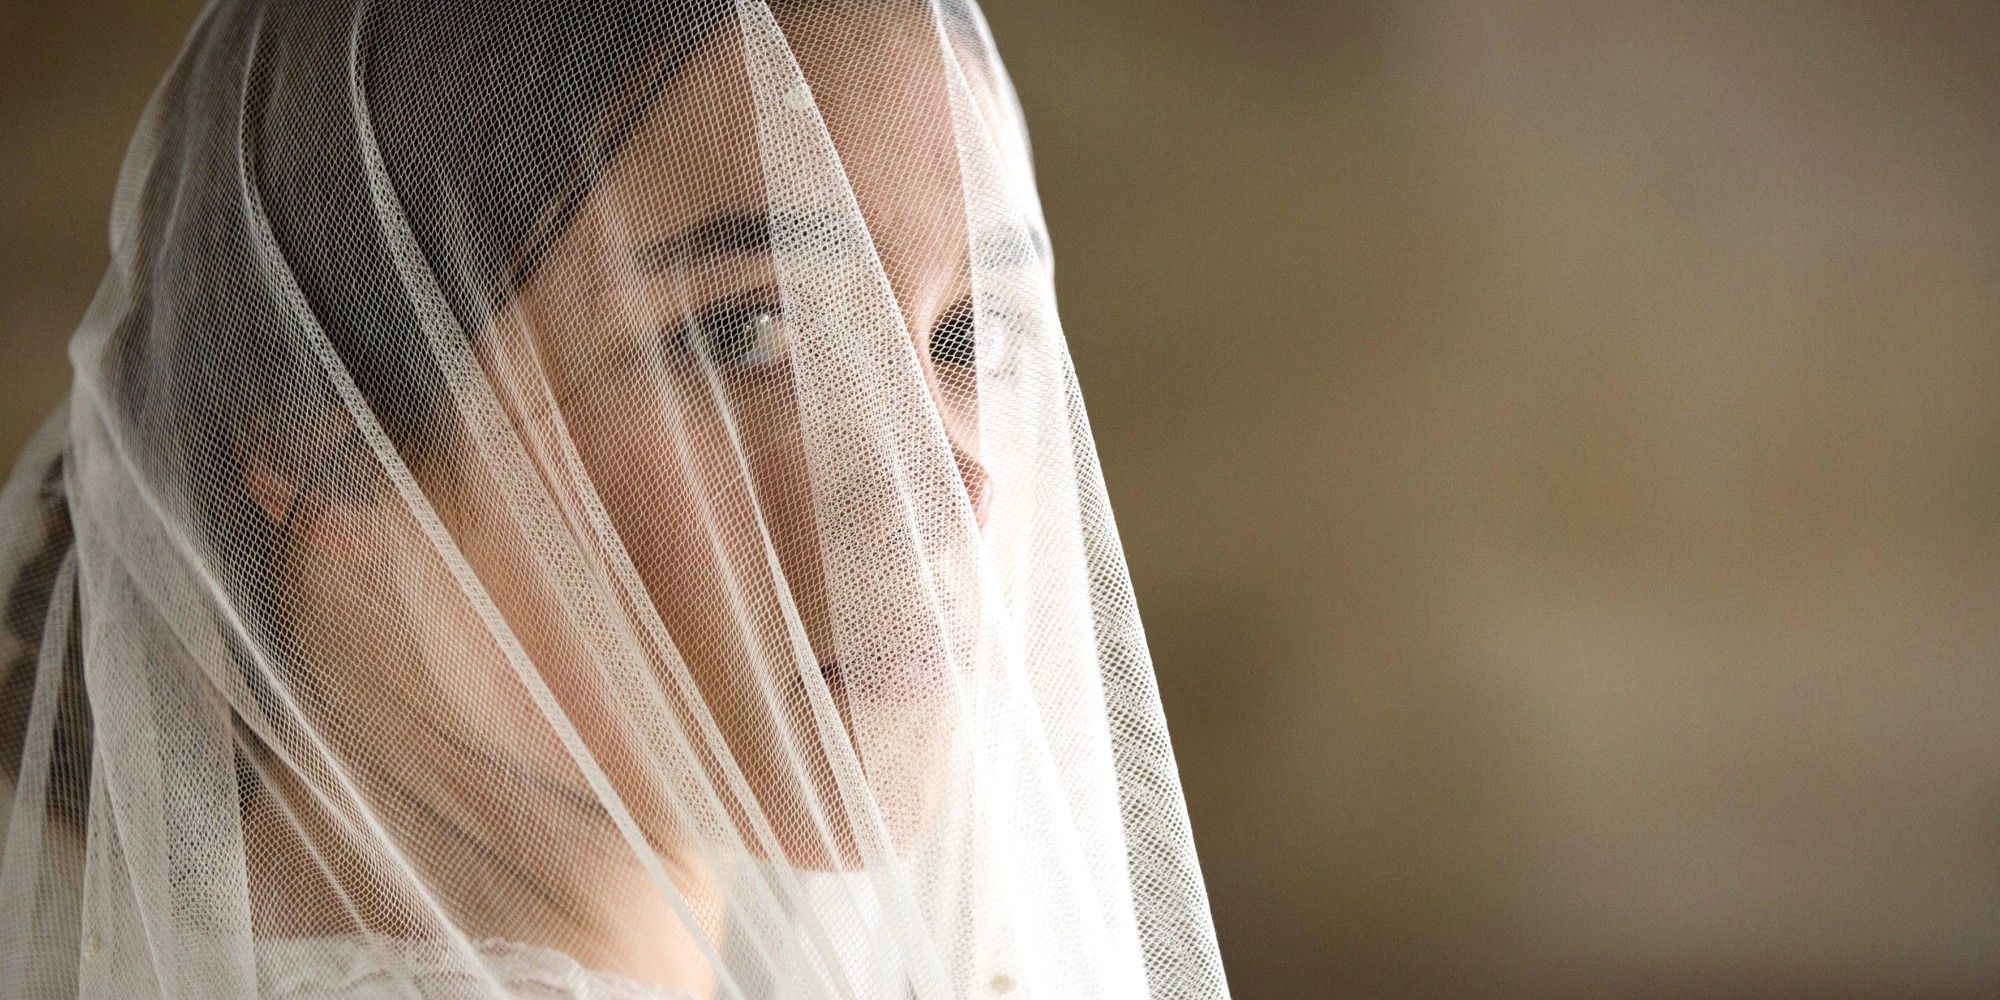 Florence Pugh wearing a veil and looking sideways in a still from Lady Macbeth 